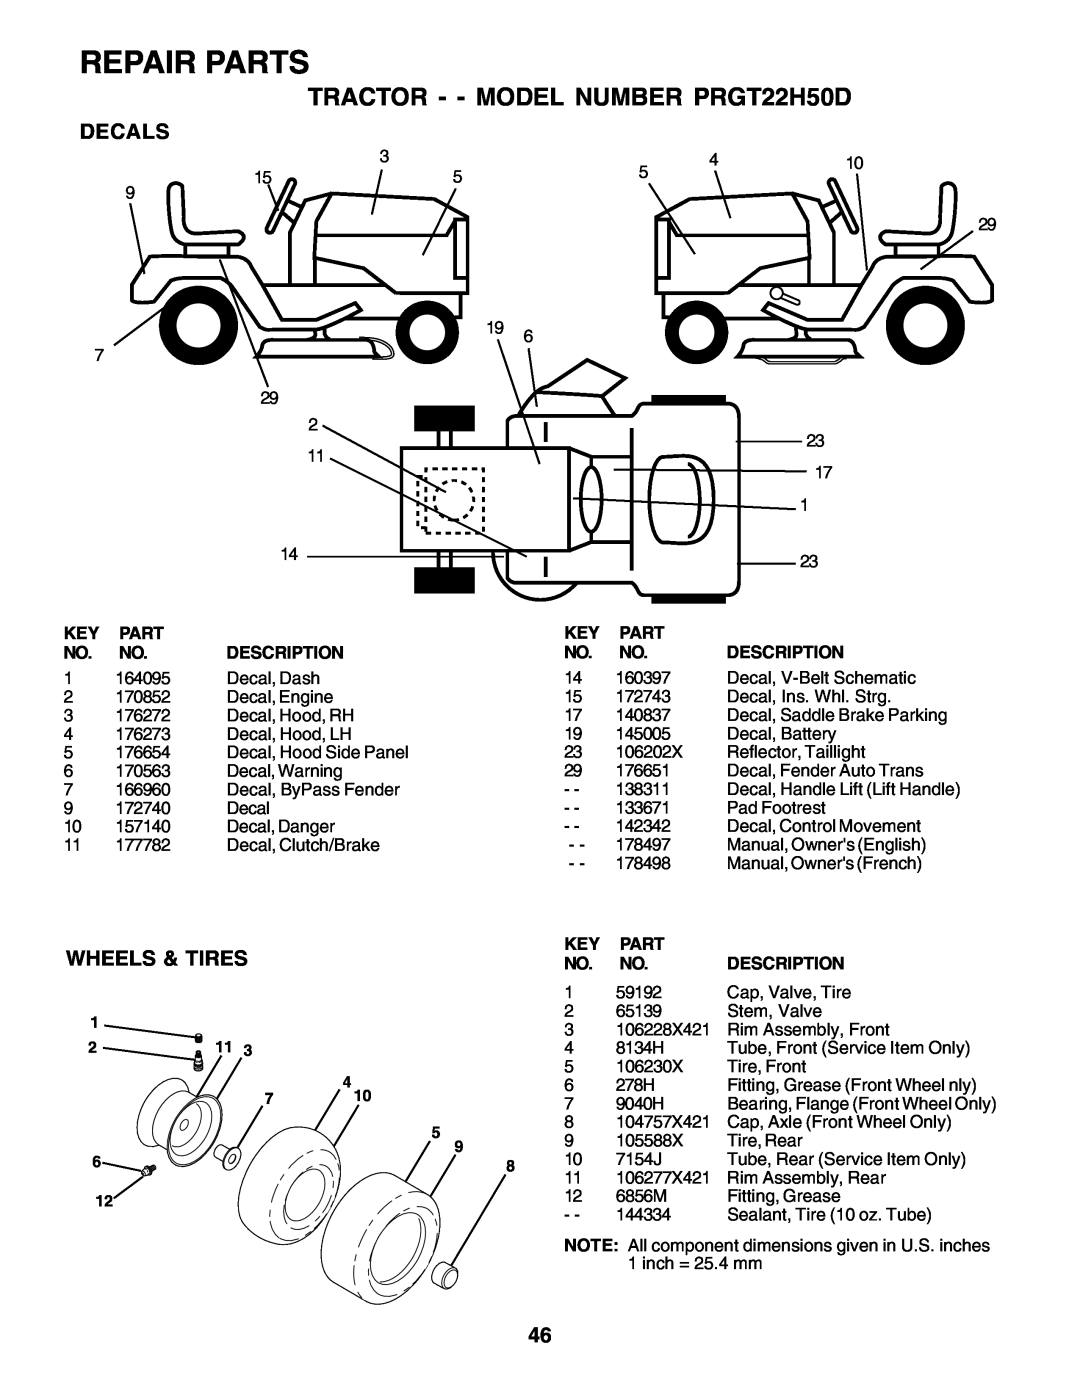 Poulan owner manual Repair Parts, TRACTOR - - MODEL NUMBER PRGT22H50D, Decals, Wheels & Tires 